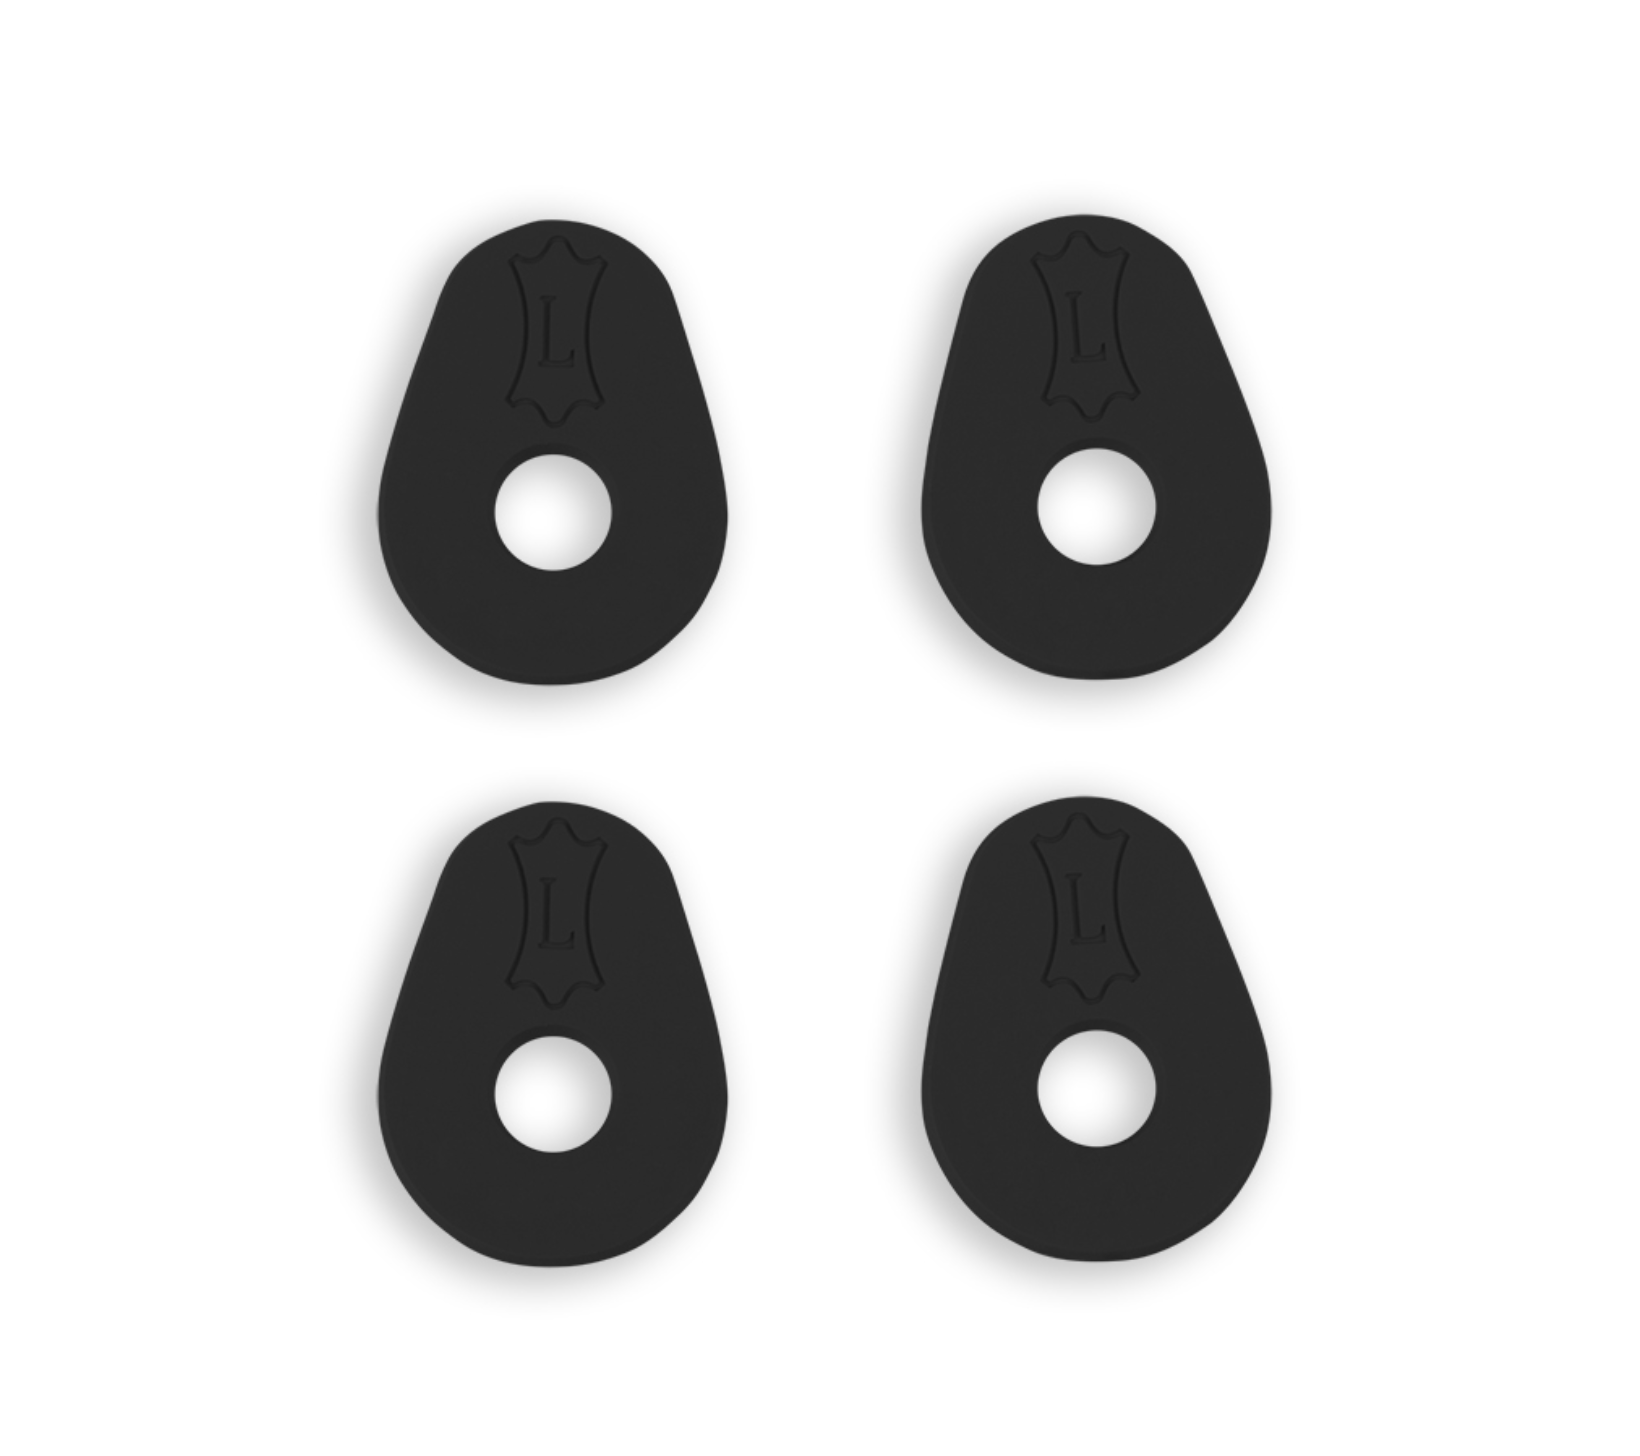 Levy's Ring Block, Black - 4 pack of Rubber Guitar Strap Locks-1